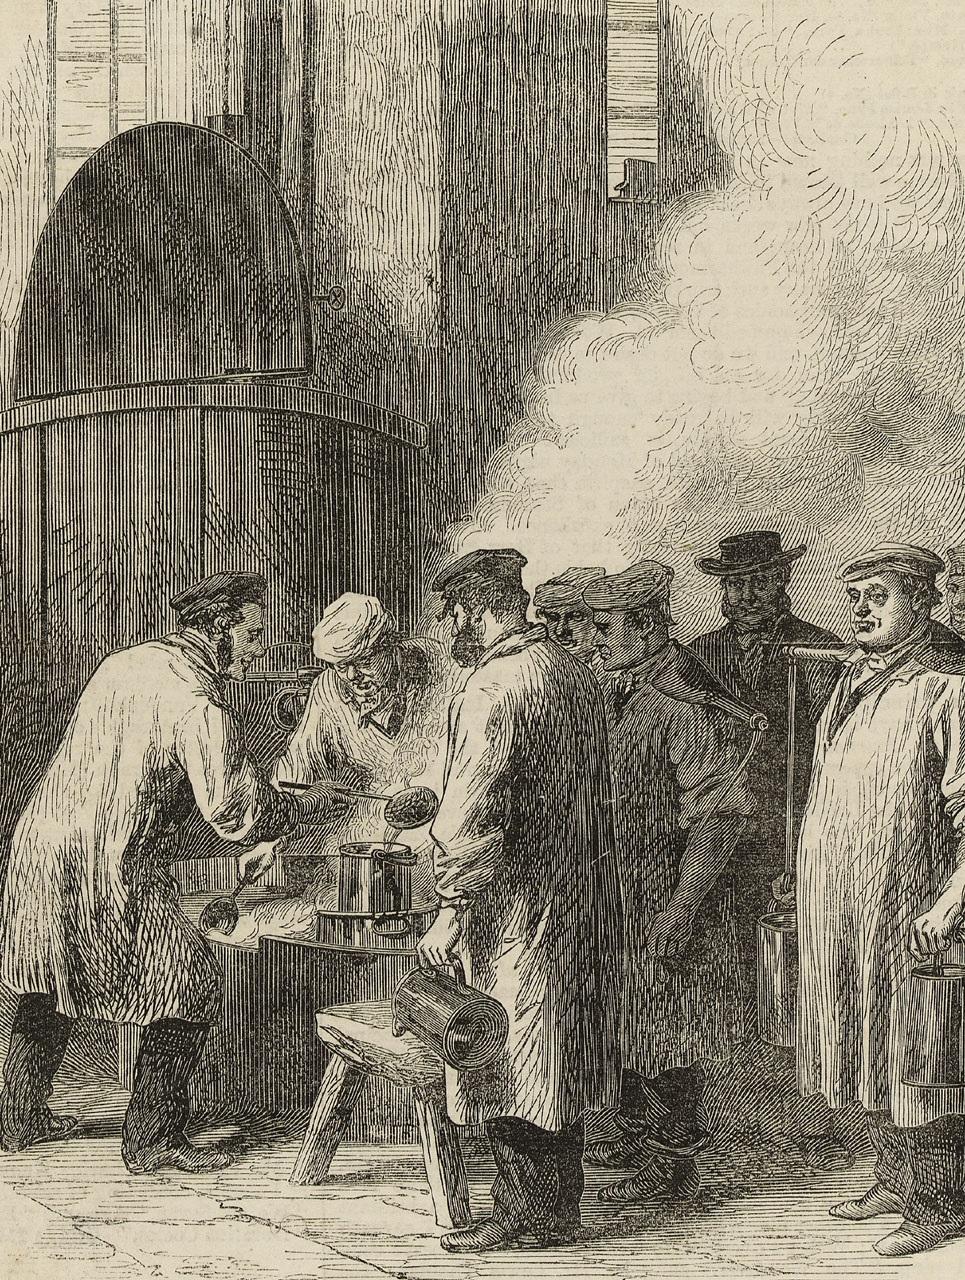 Group of workers gathered around a tea urn